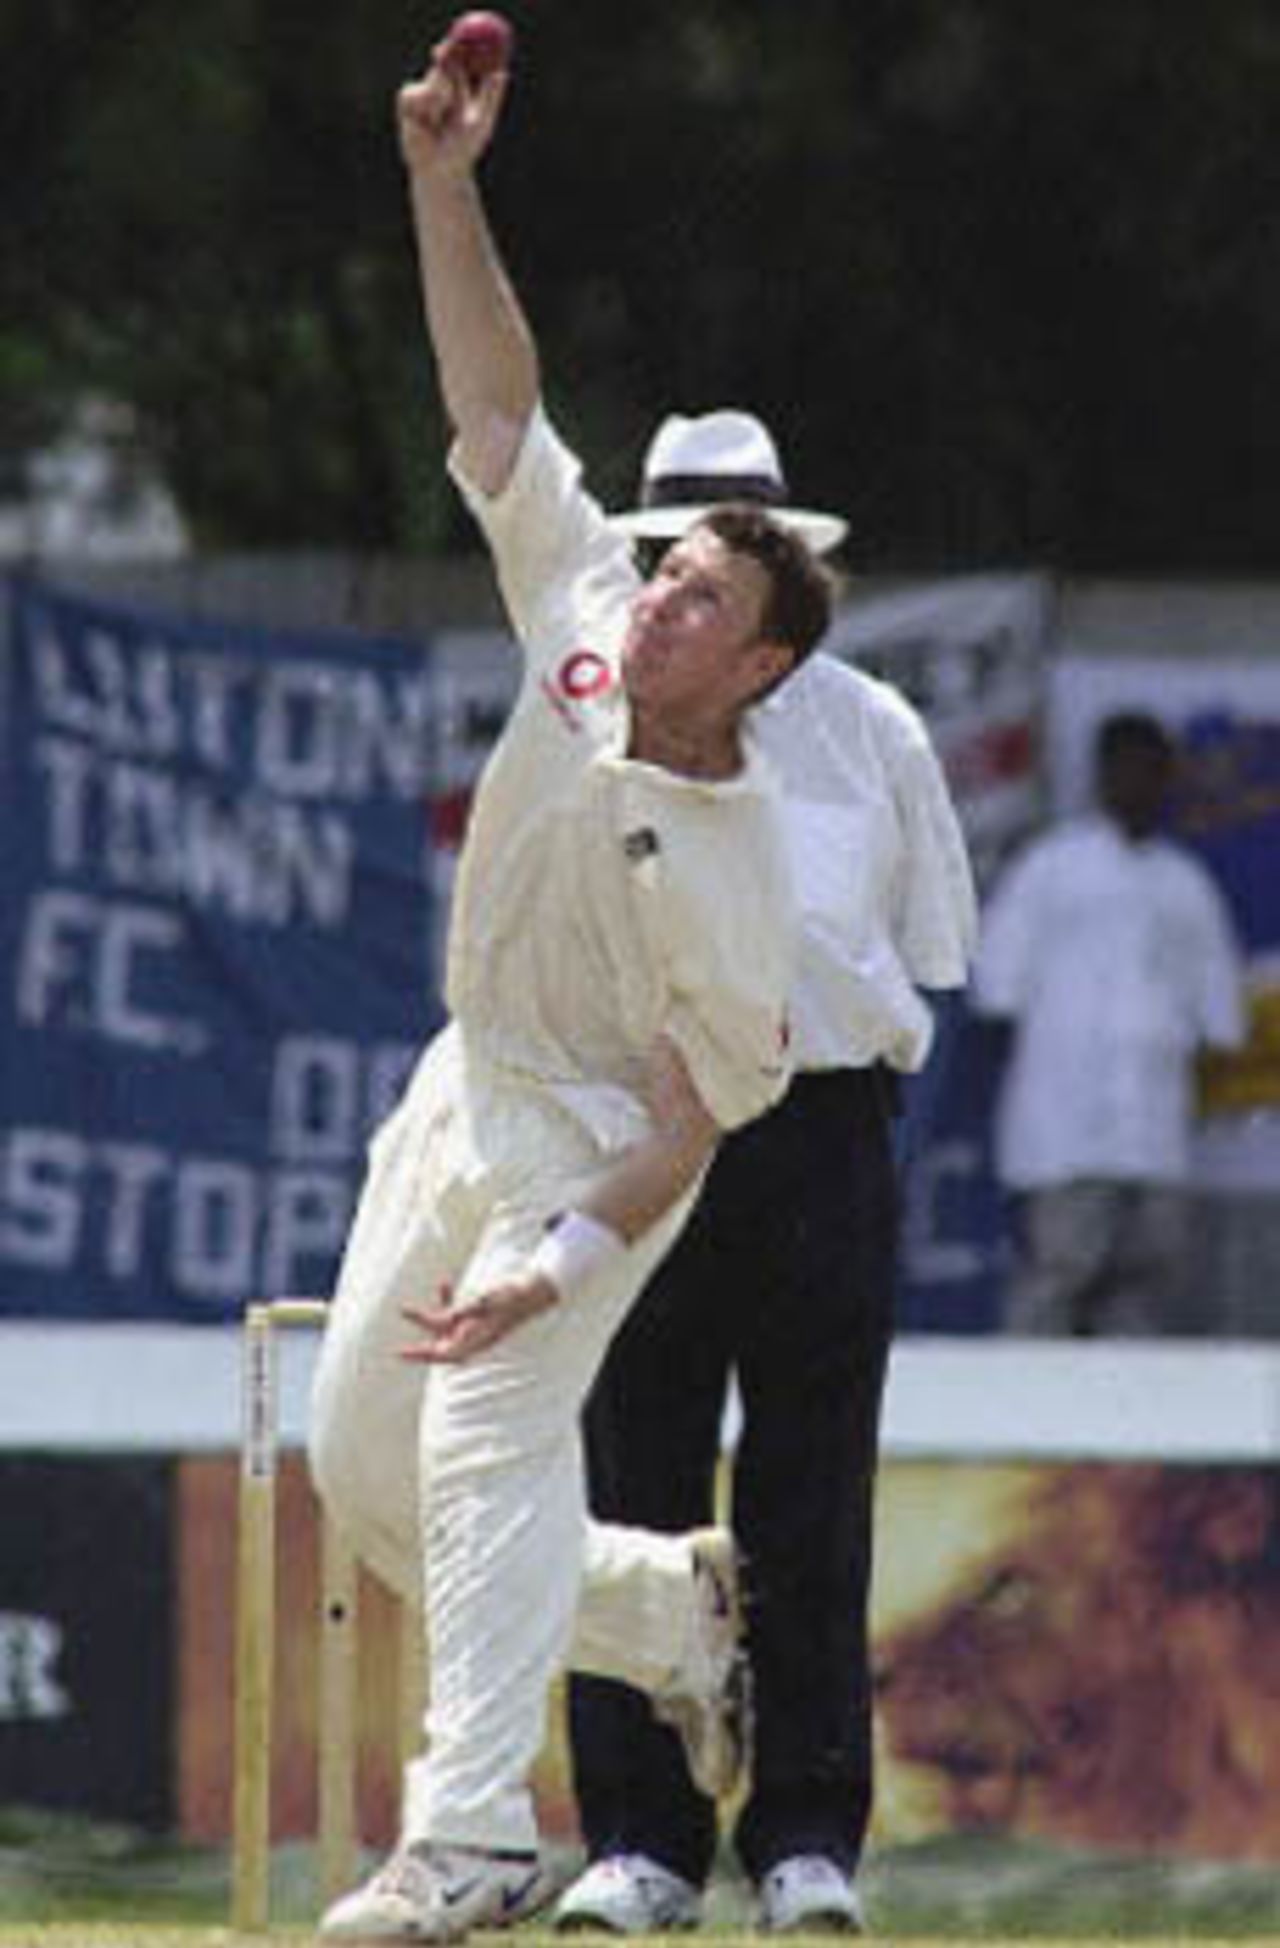 England fast bowler Robert Croft delivers a ball to Sri Lankan skipper Sanath Jayasuriya on the first day of the first cricket Test match at Galle International Cricket Stadium, 22 February 2001. Sri Lanka recovered from the early loss of skipper Jayasuriya for 14 to secure 70 for one wicket at lunch.